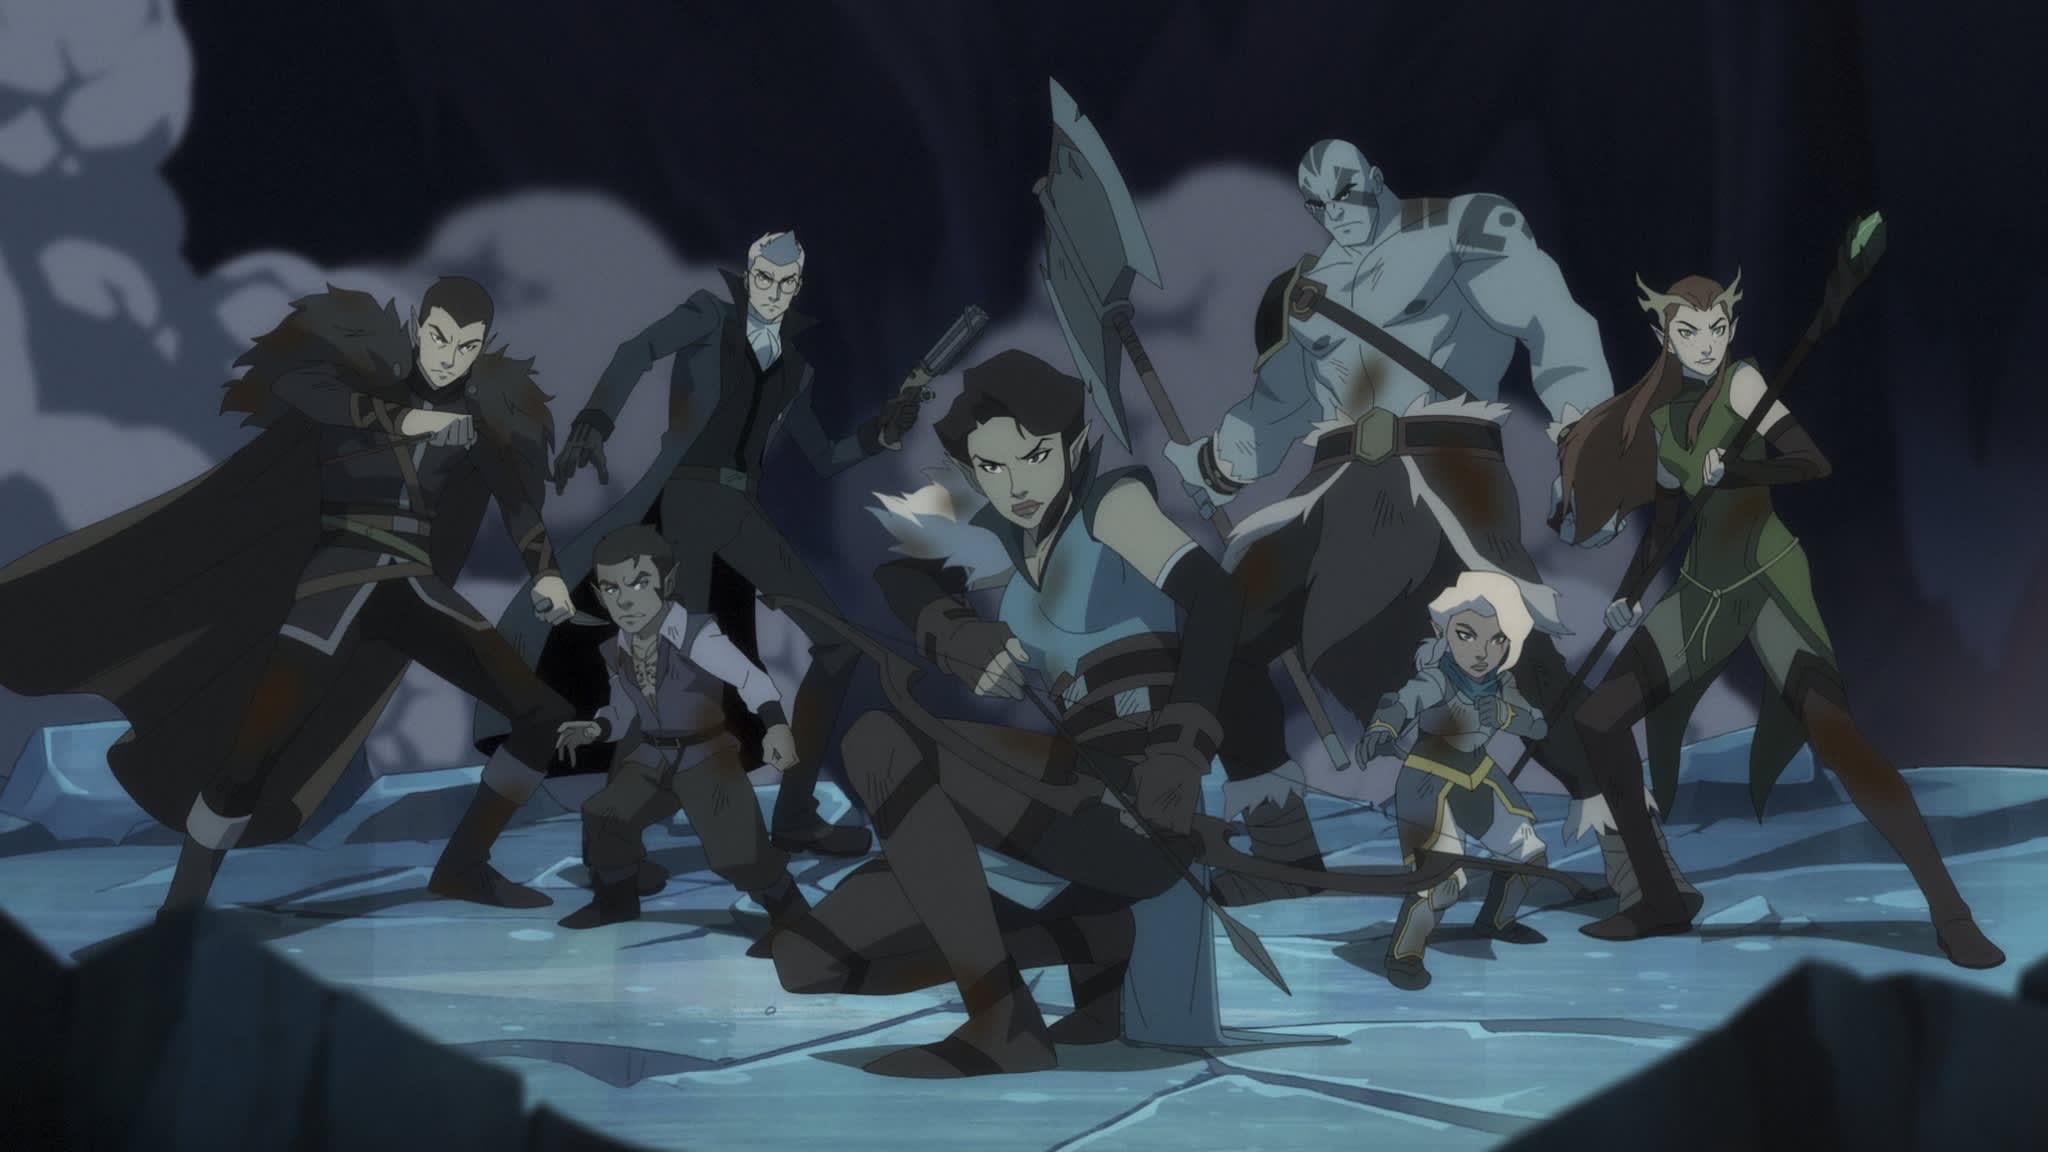 Critical Role's Dungeons & Dragons game served as inspiration for 'The Legend of Vox Machina.